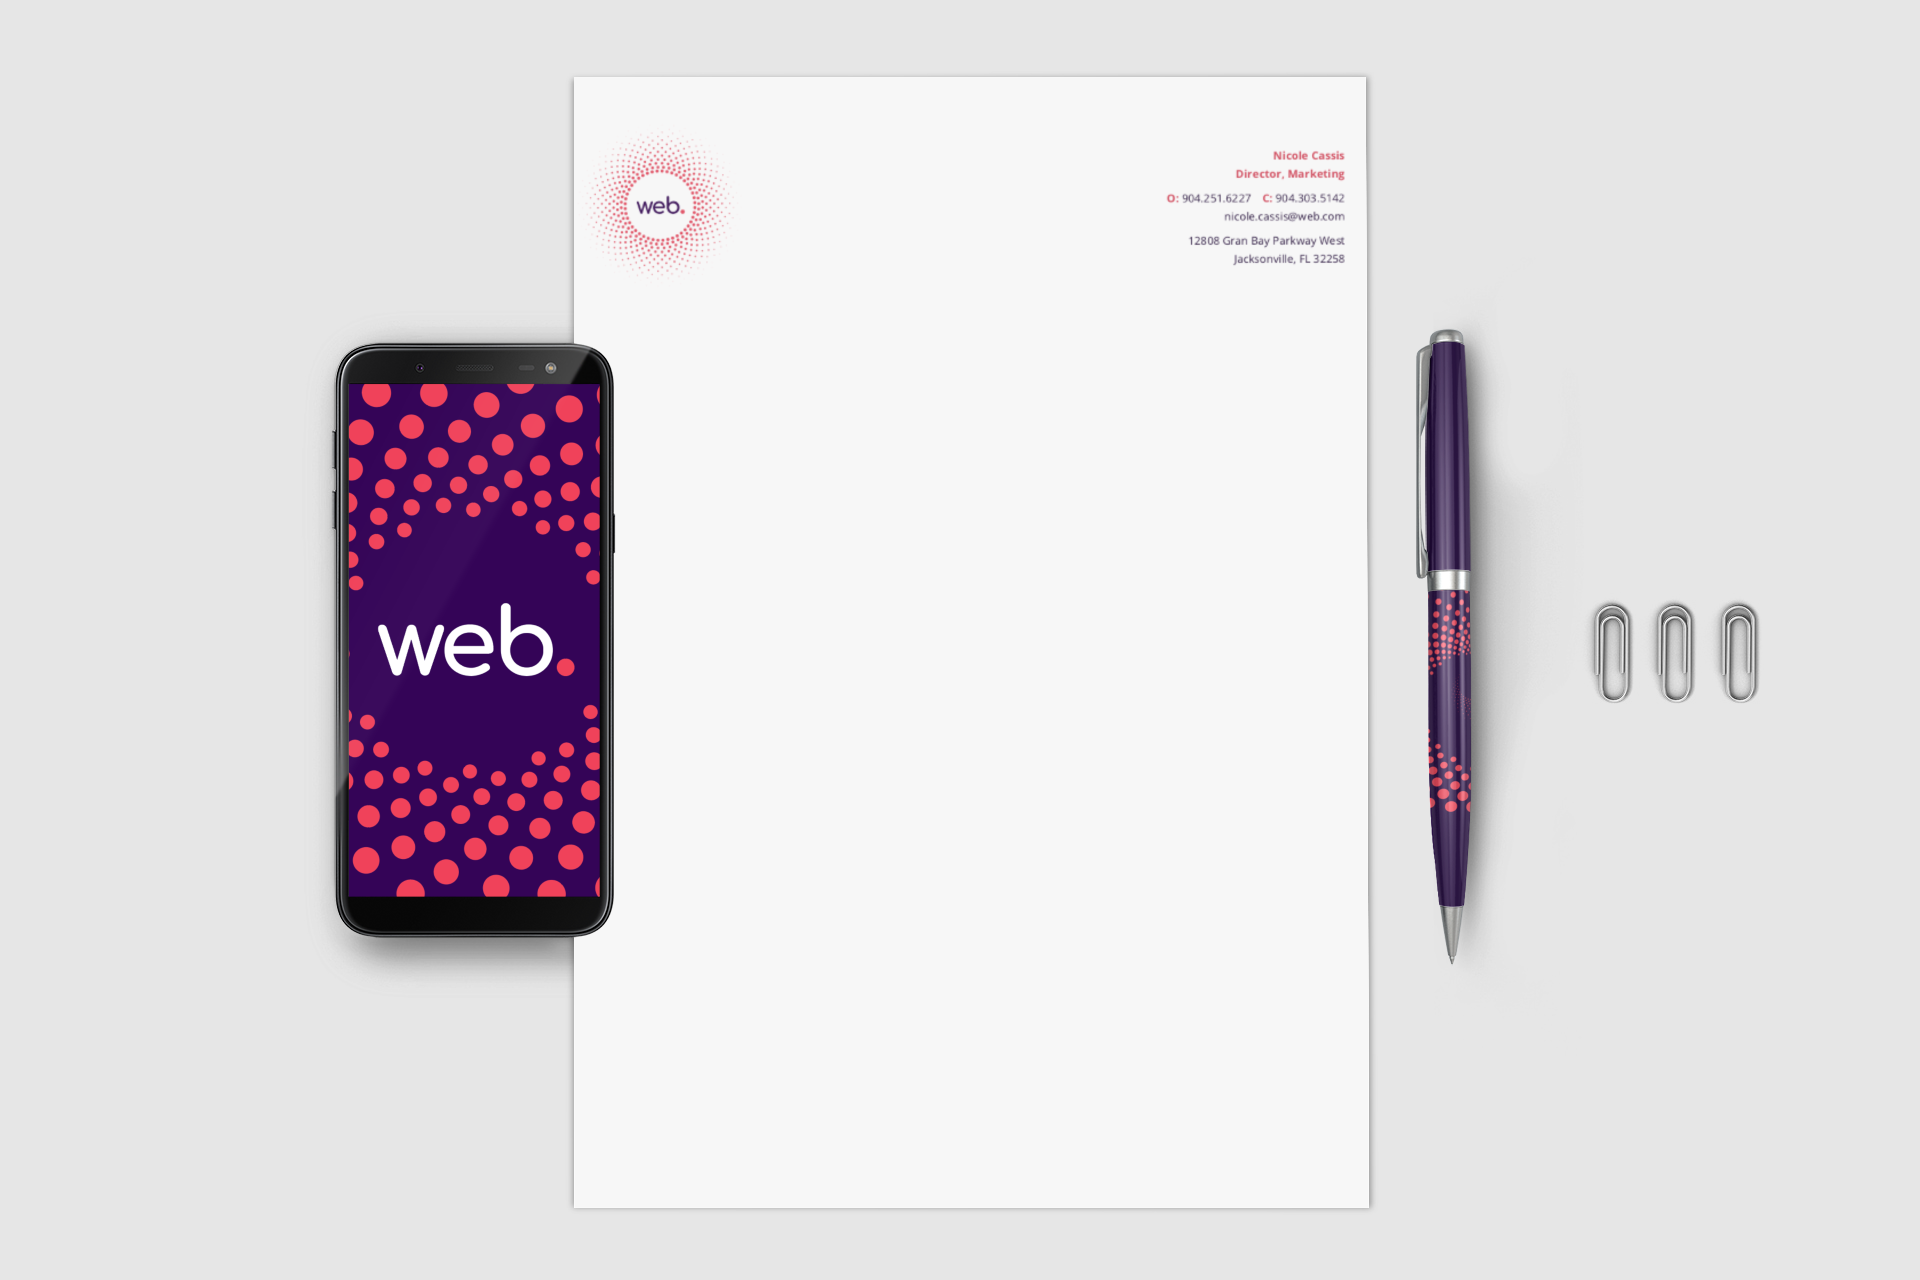 mockup-of-an-android-phone-next-to-an-a4-letterhead-and-a-pen-924-el.png